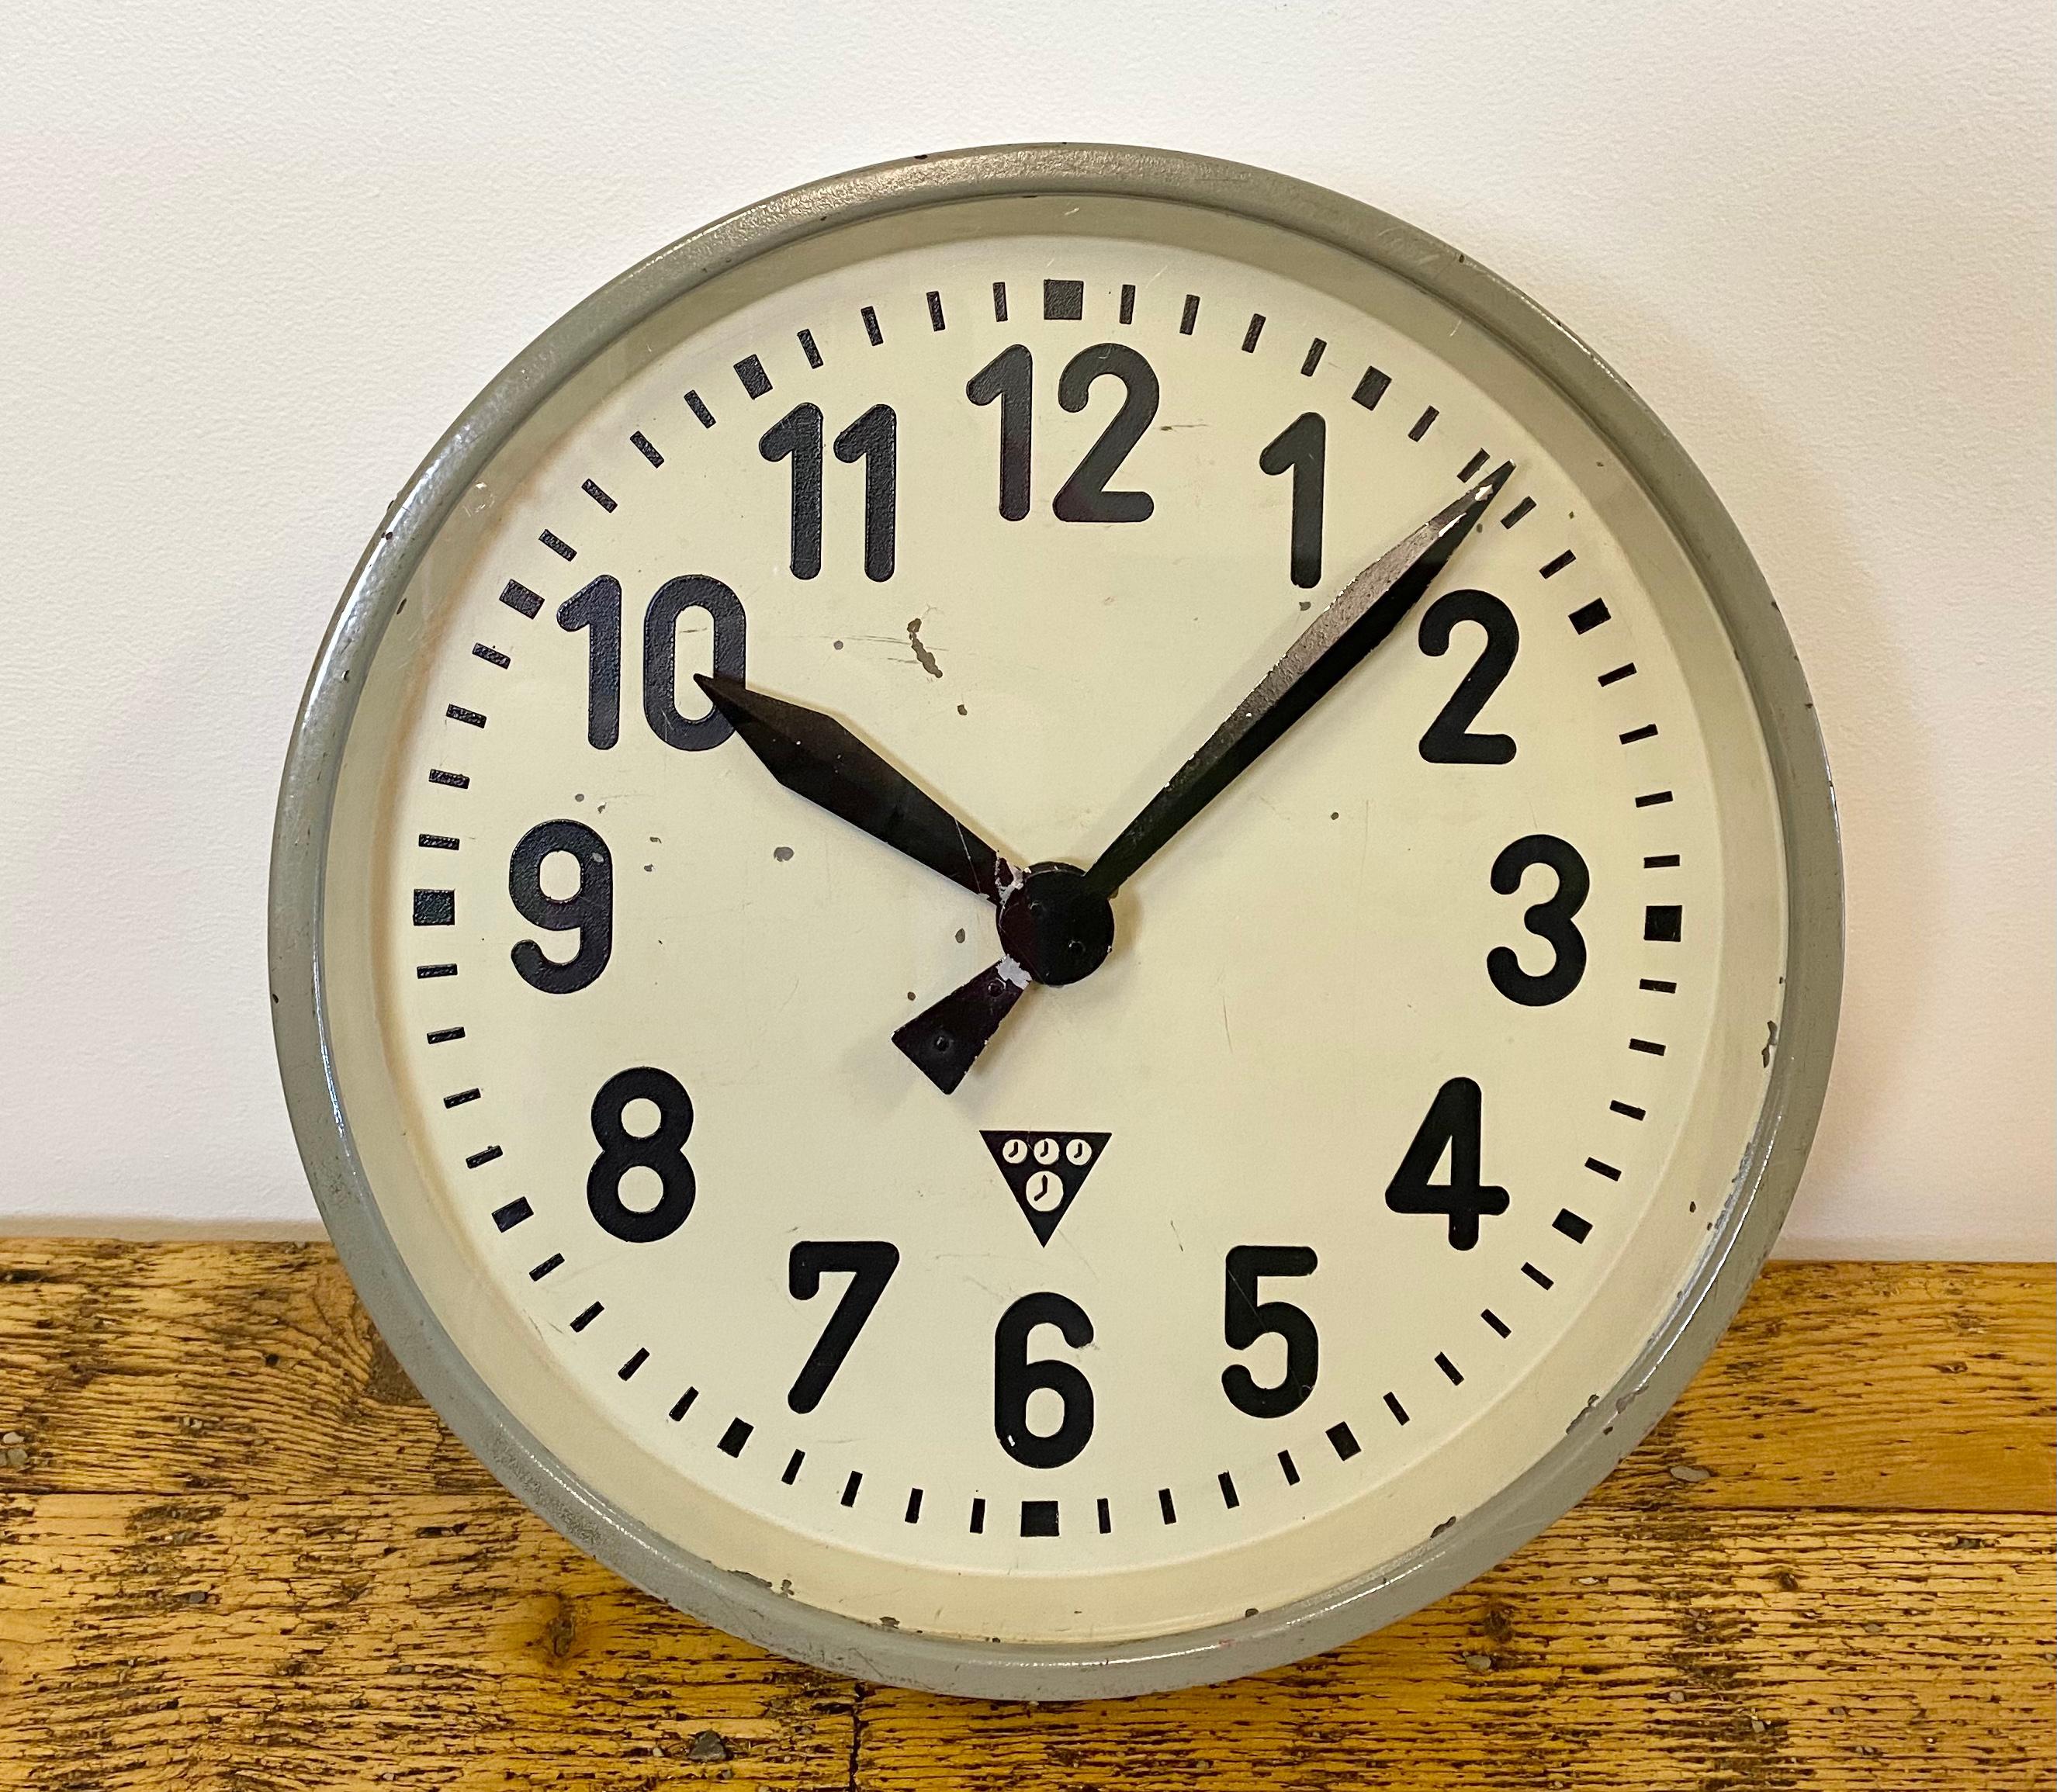 This wall clock was produced by Pragotron in former Czechoslovakia during the 1950s. It features a grey metal frame, iron dial, aluminium hands and a clear glass cover. The piece has been converted into a battery-powered clockwork and requires only